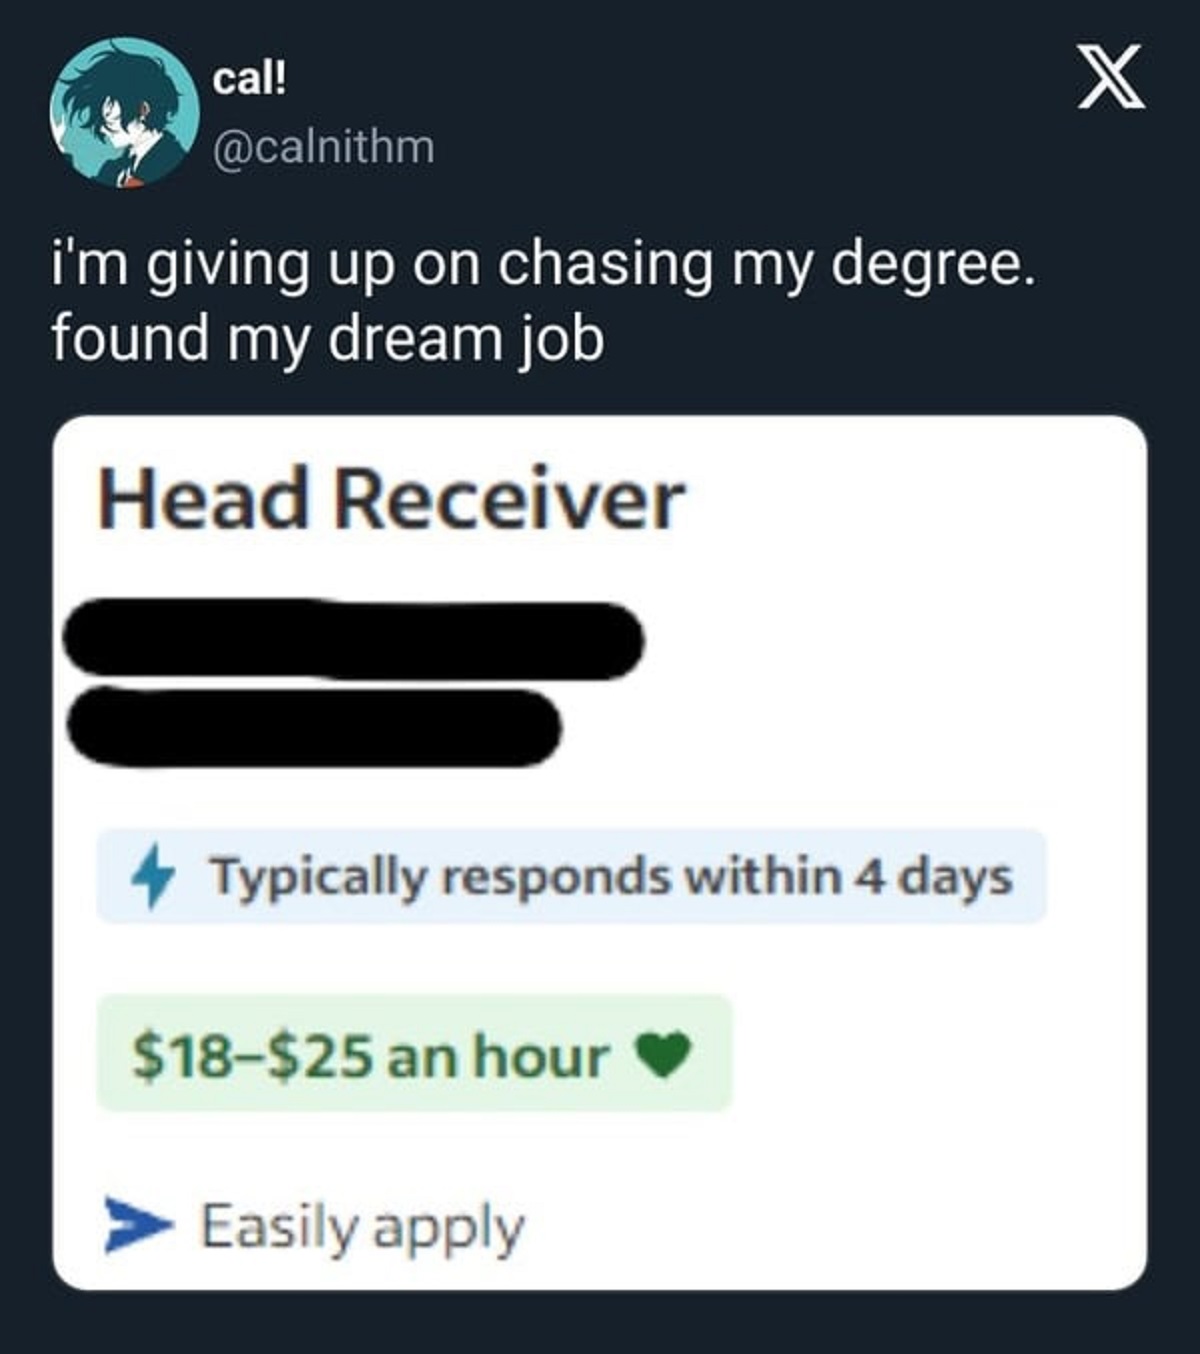 screenshot - cal! i'm giving up on chasing my degree. found my dream job Head Receiver Typically responds within 4 days $18$25 an hour Easily apply X